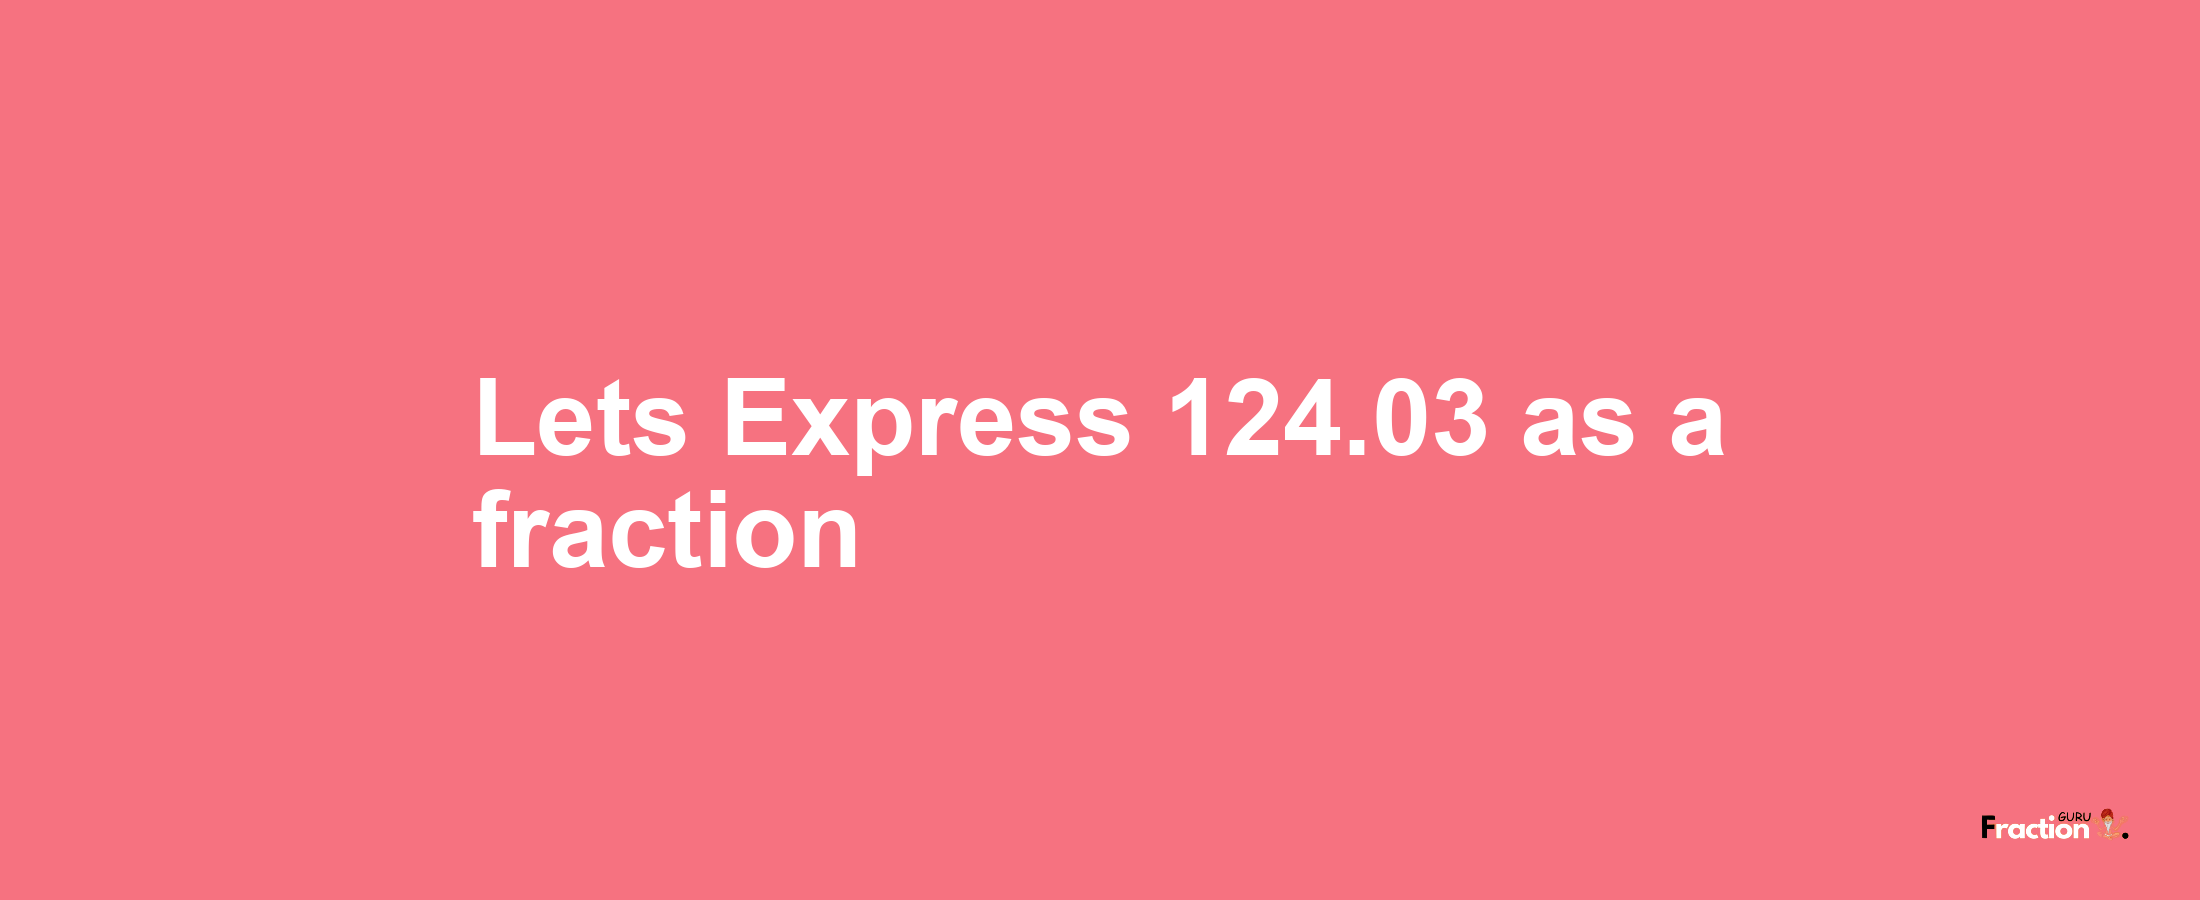 Lets Express 124.03 as afraction